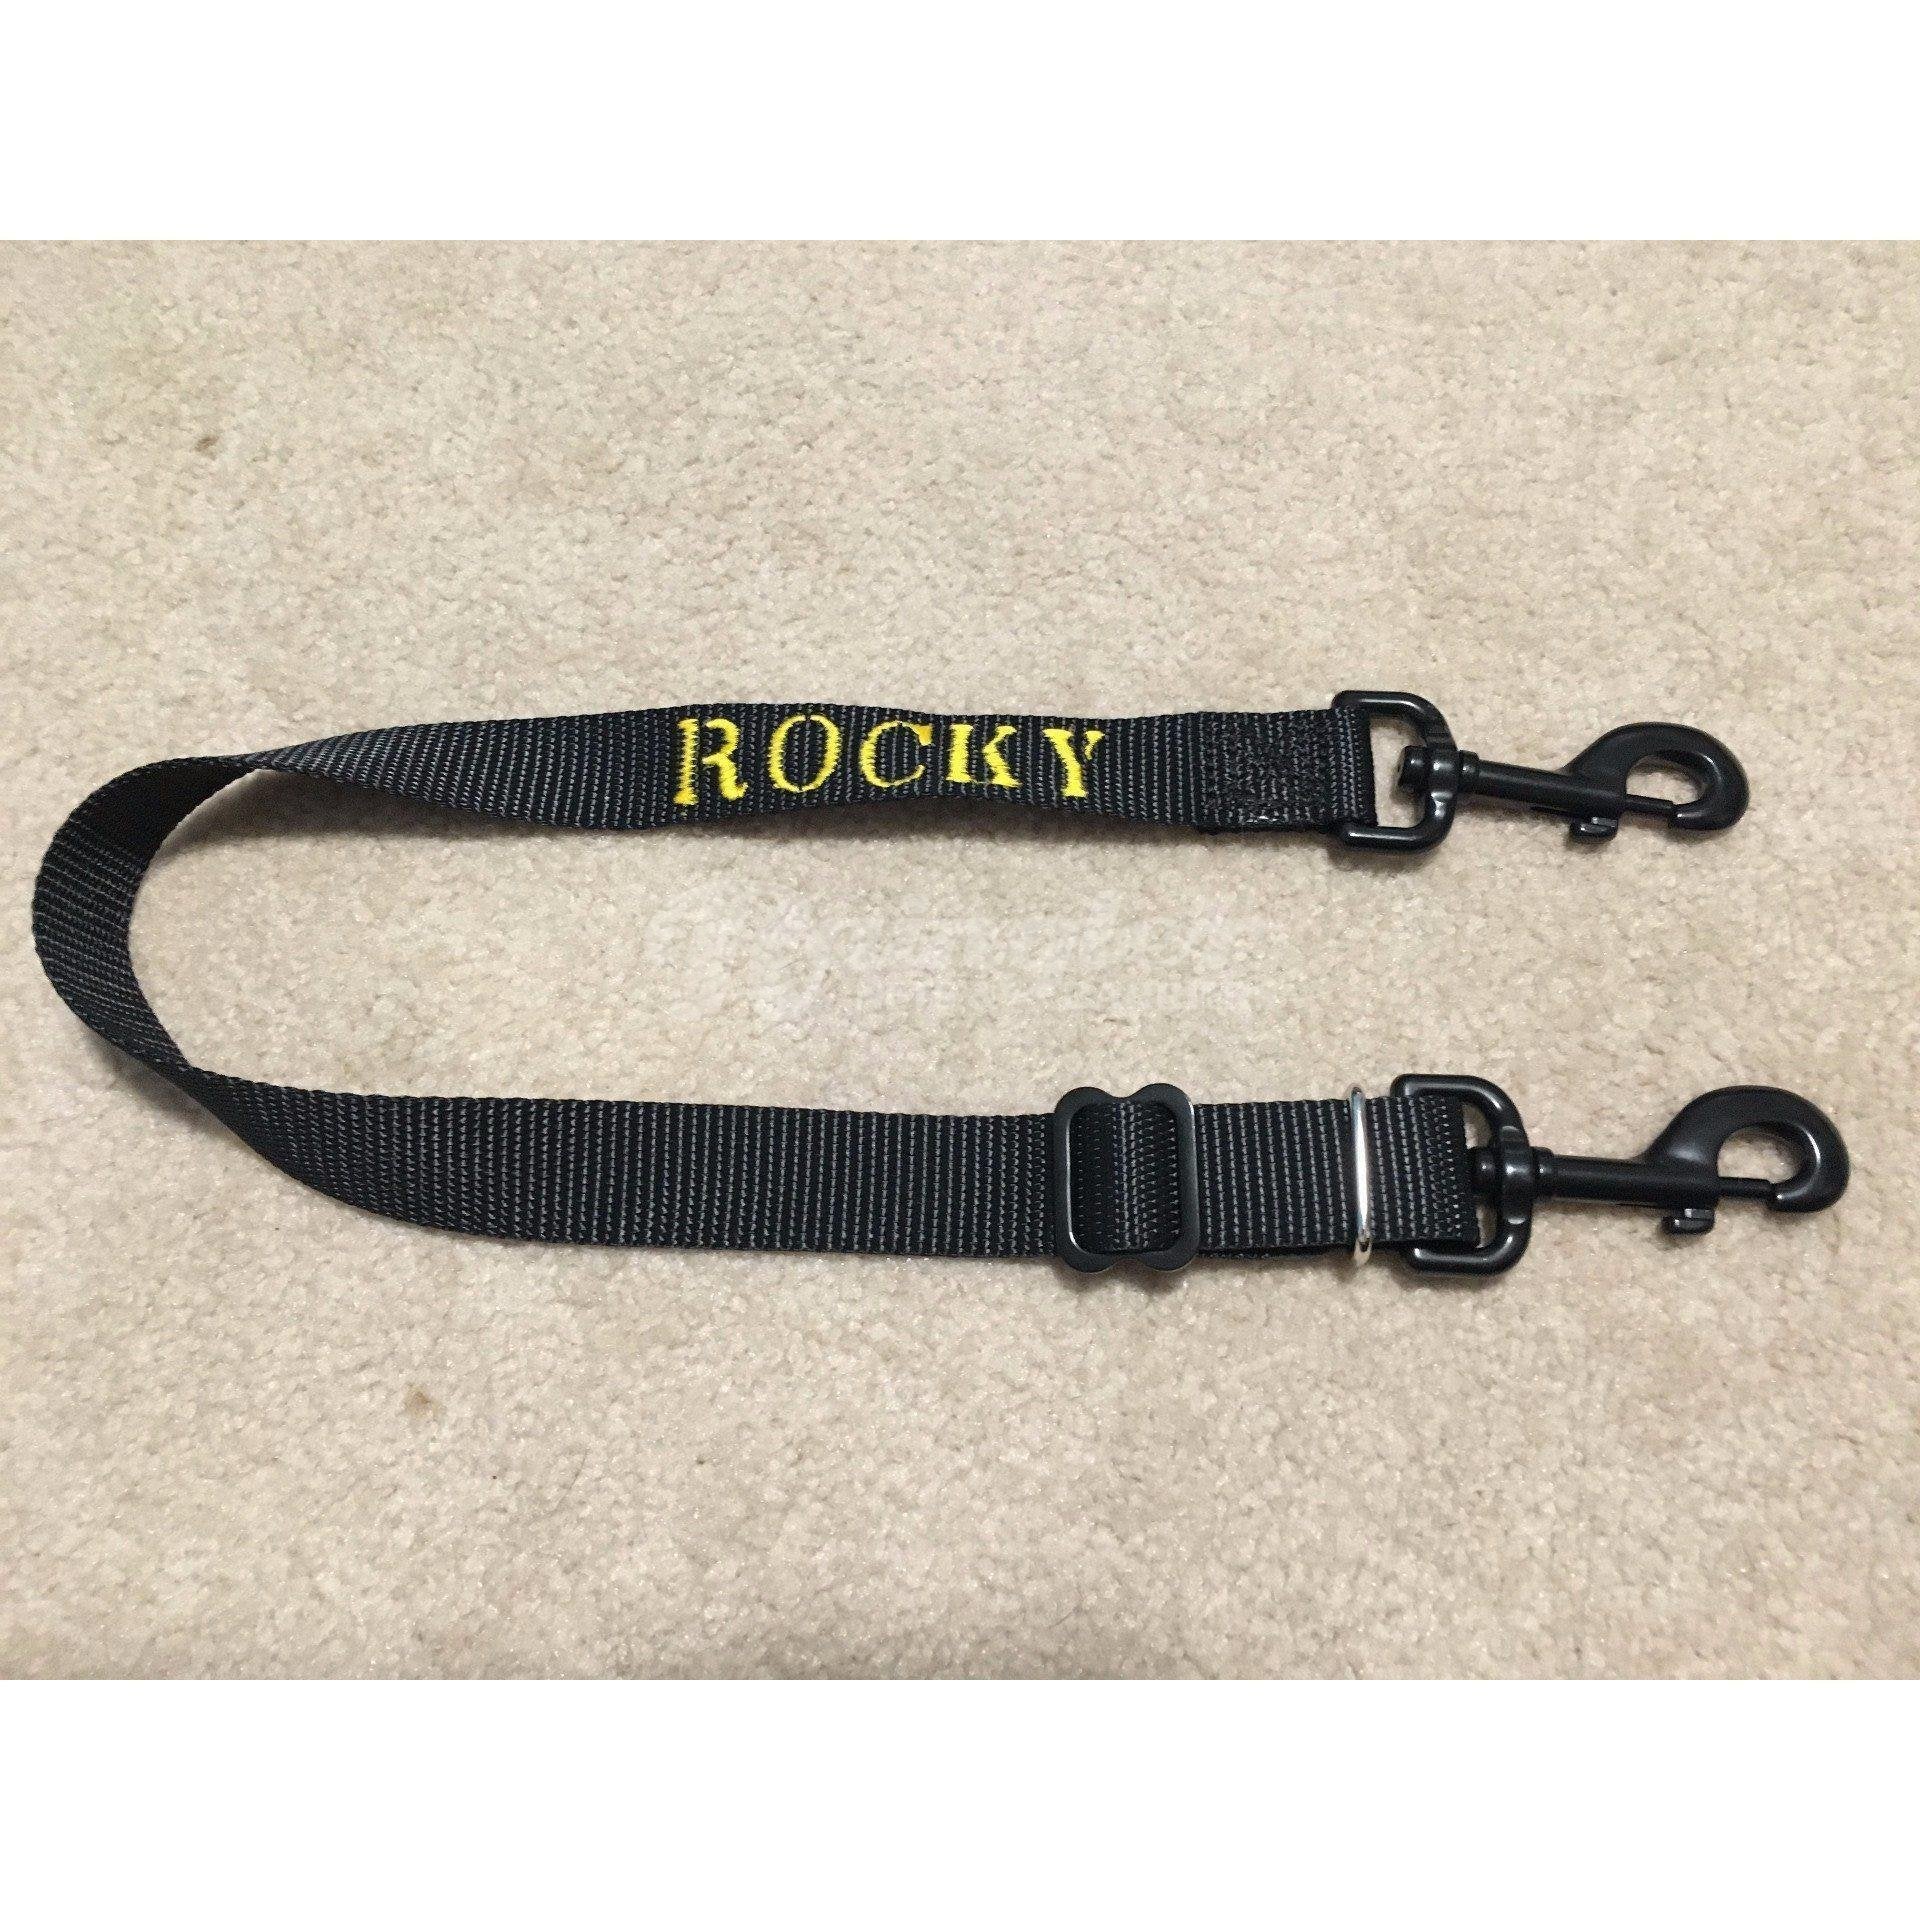 MIL-SPEC Heavy Duty Snap Strap - Cargo Hold Leash or Extension Clip On for Dogs-Raingler